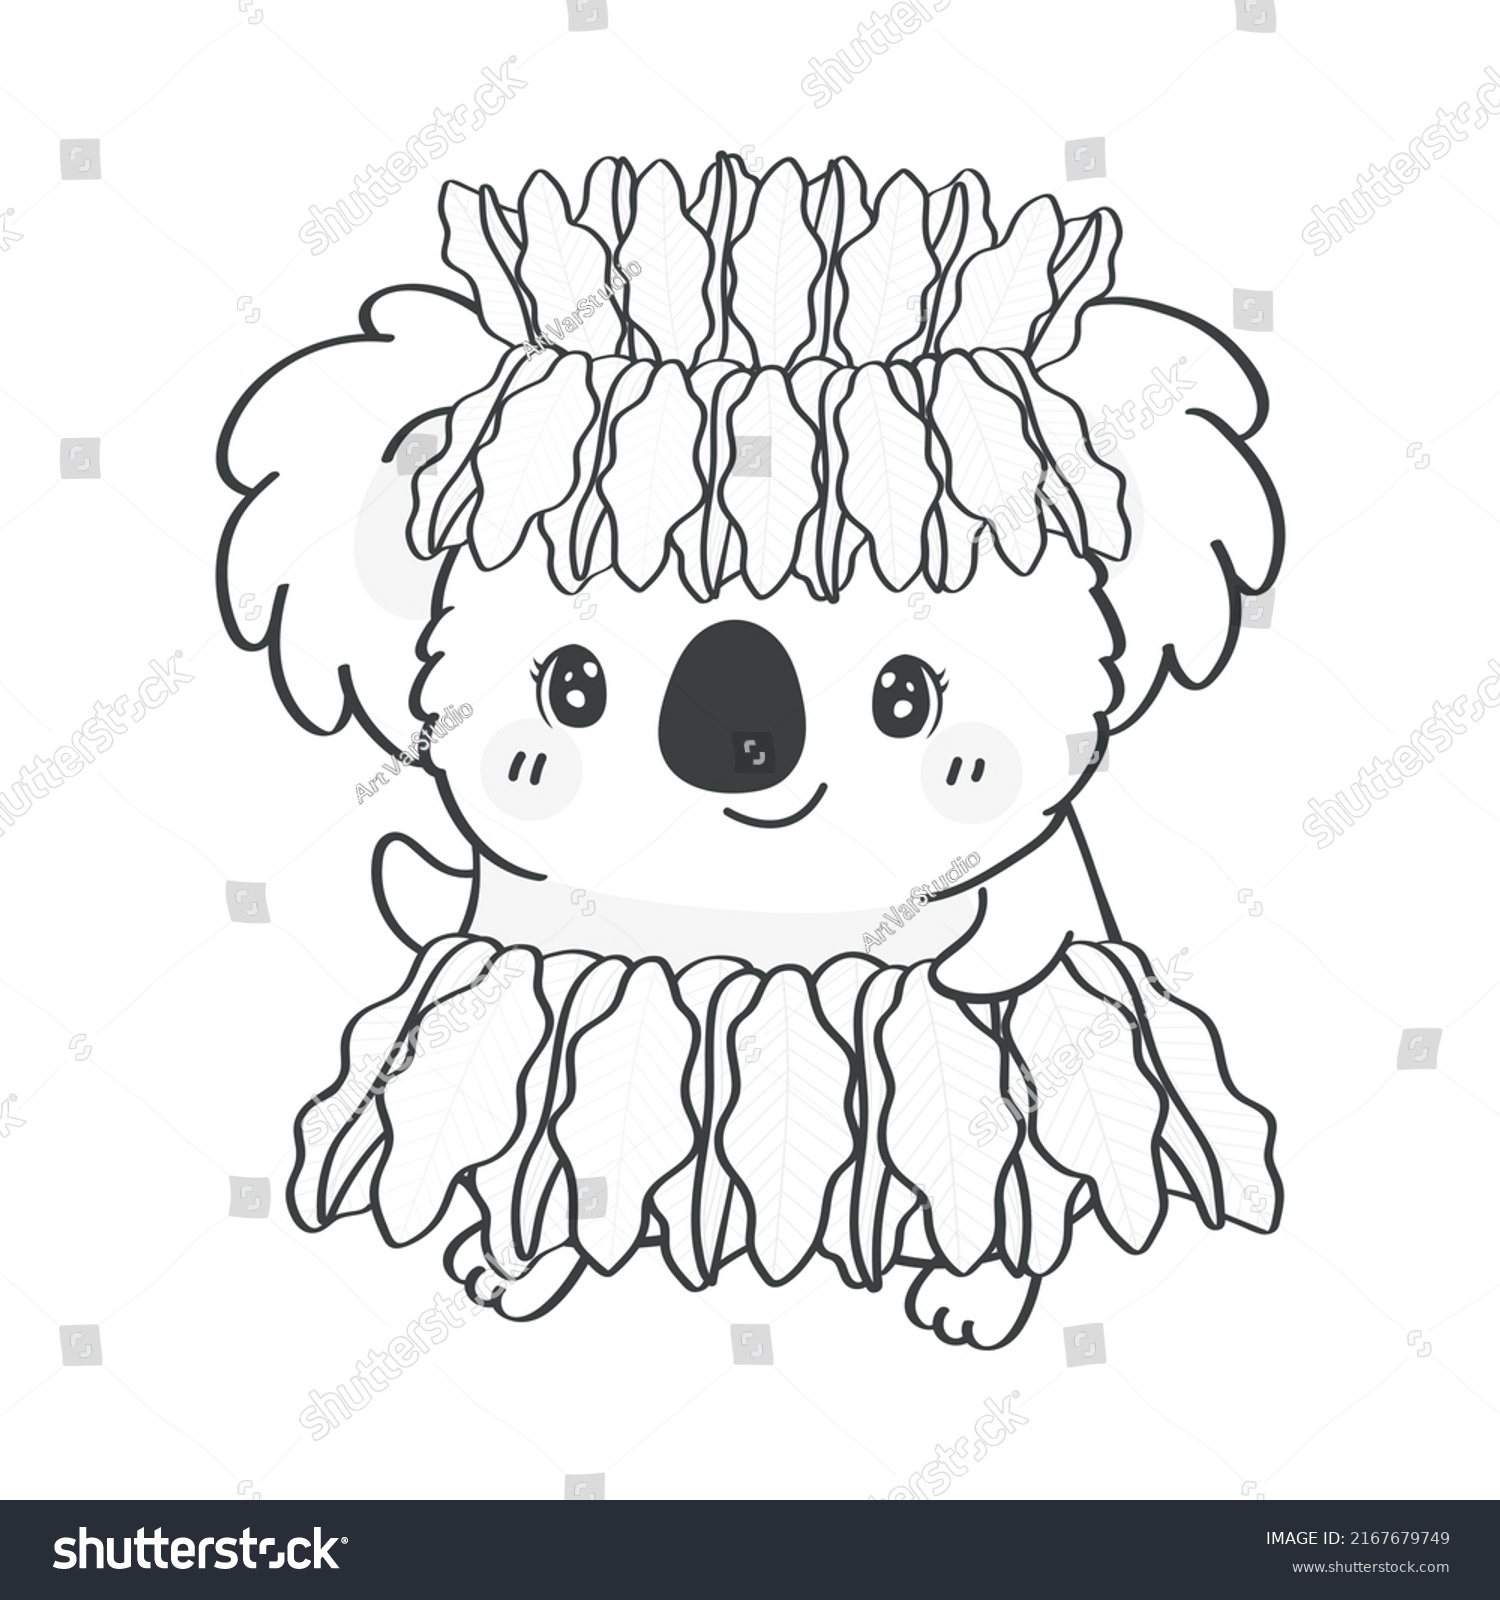 SVG of Black and White Koala Bear Clipart in Cute Cartoon Style Beautiful Clip Art Coloring Page Koala in Hawaiian Costume. Vector Illustration of an Animal for Prints for Clothes, Stickers, Textile.  svg